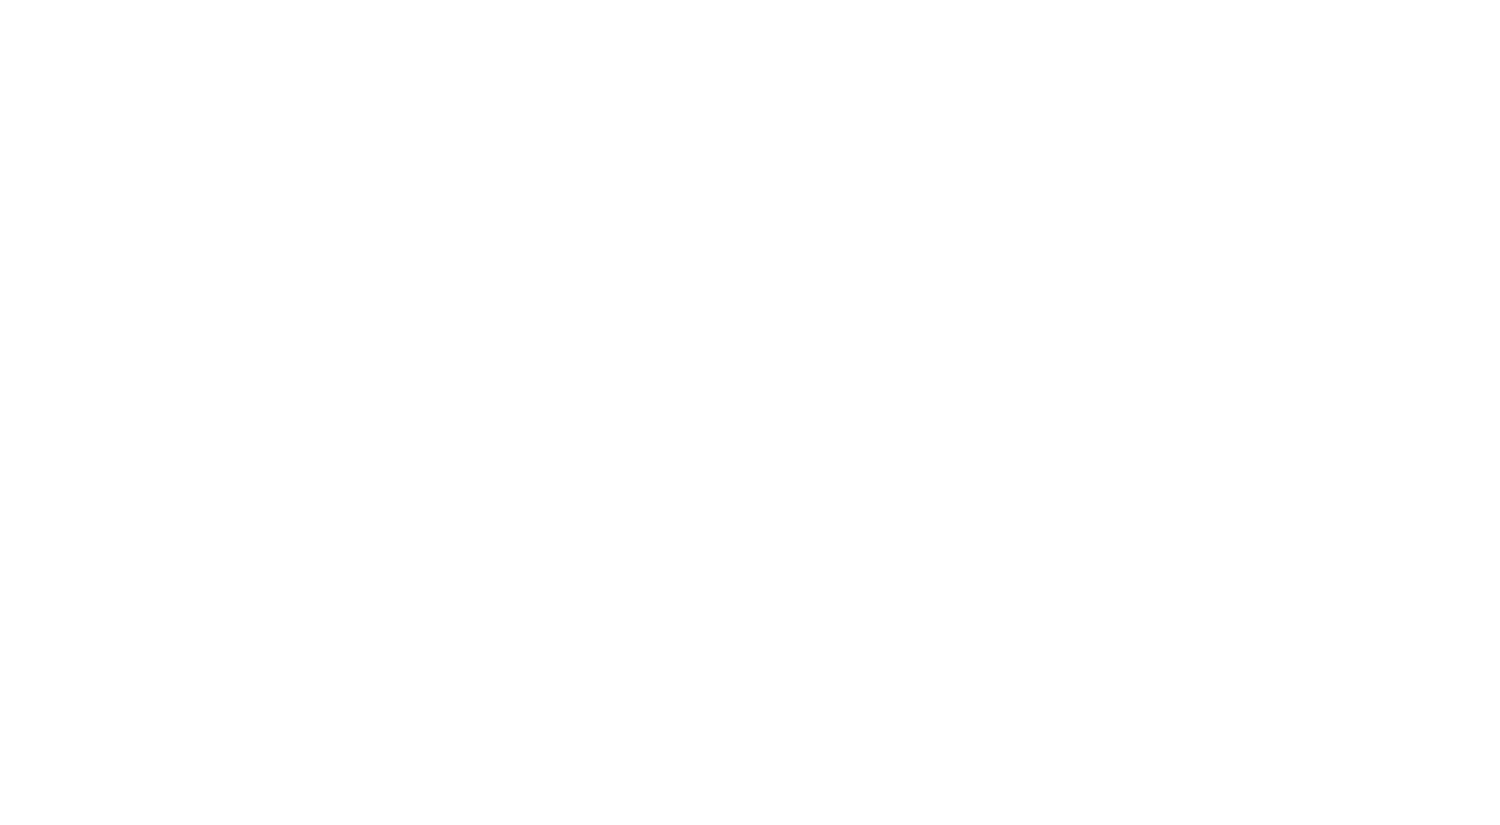 Equity Space Alliance